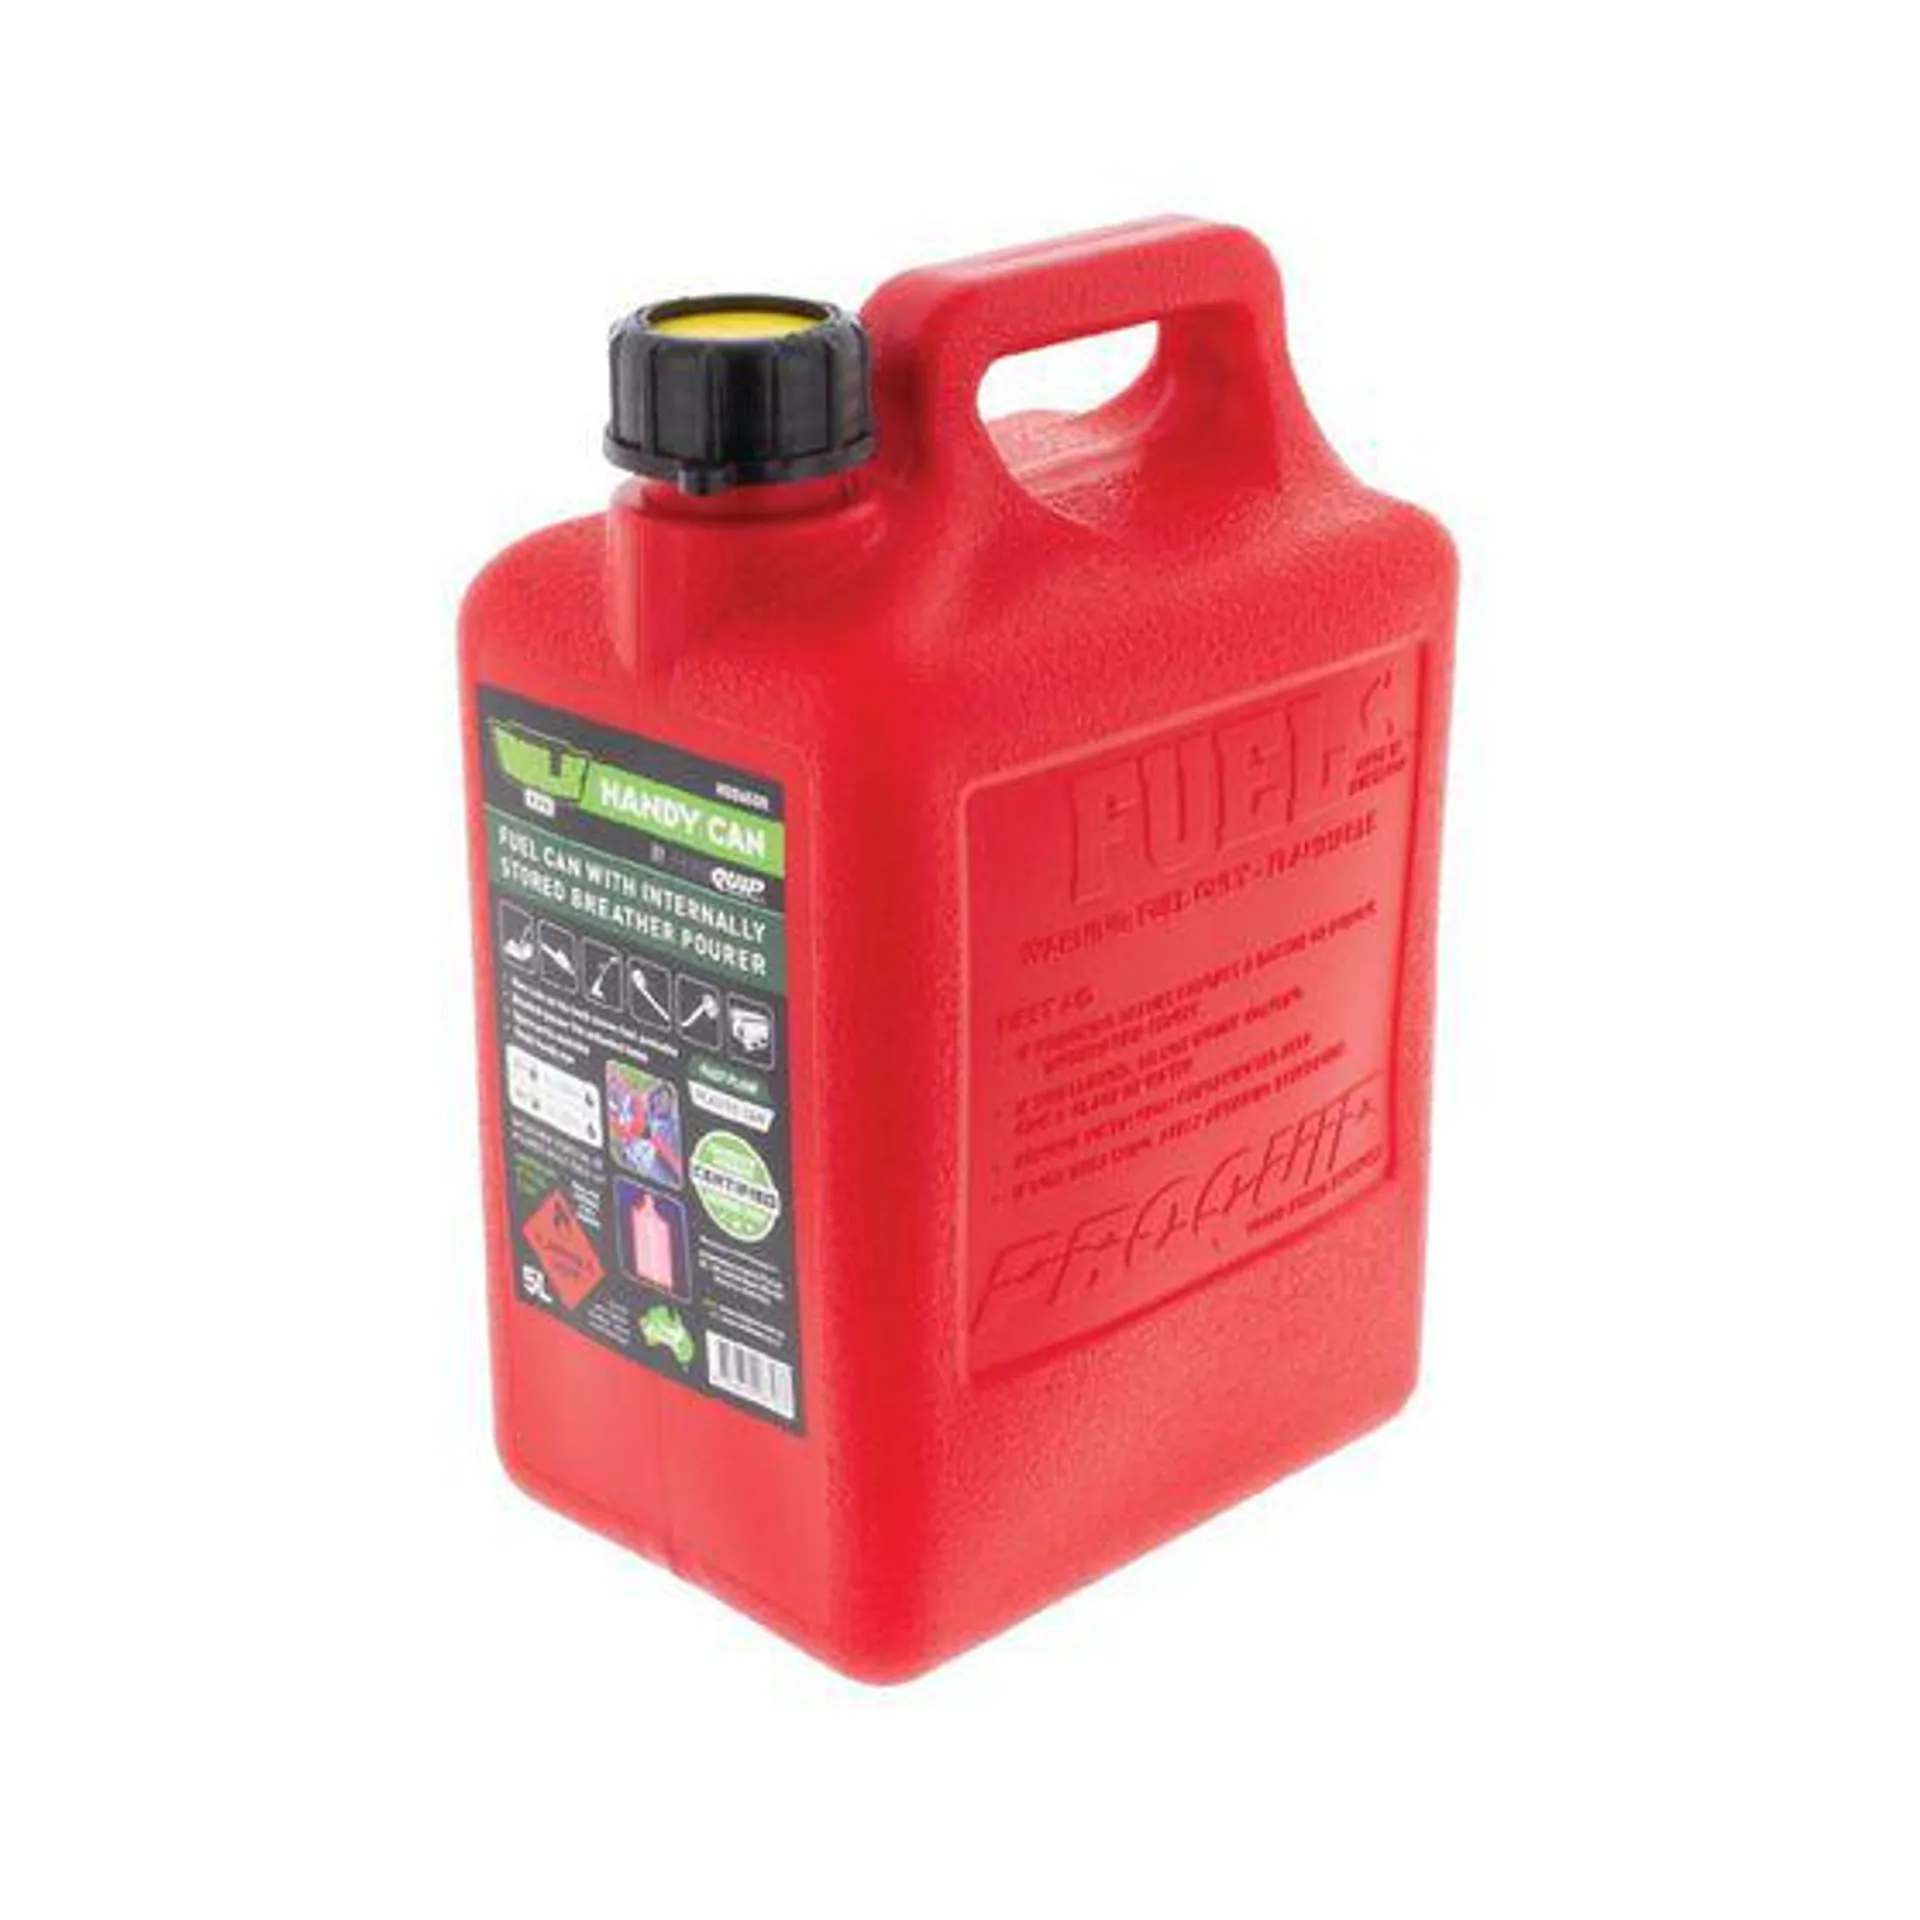 Hulk 4x4 5Lt Plastic Handy Fuel Can Red With Pourer All Type Of Fuel - HU0650R